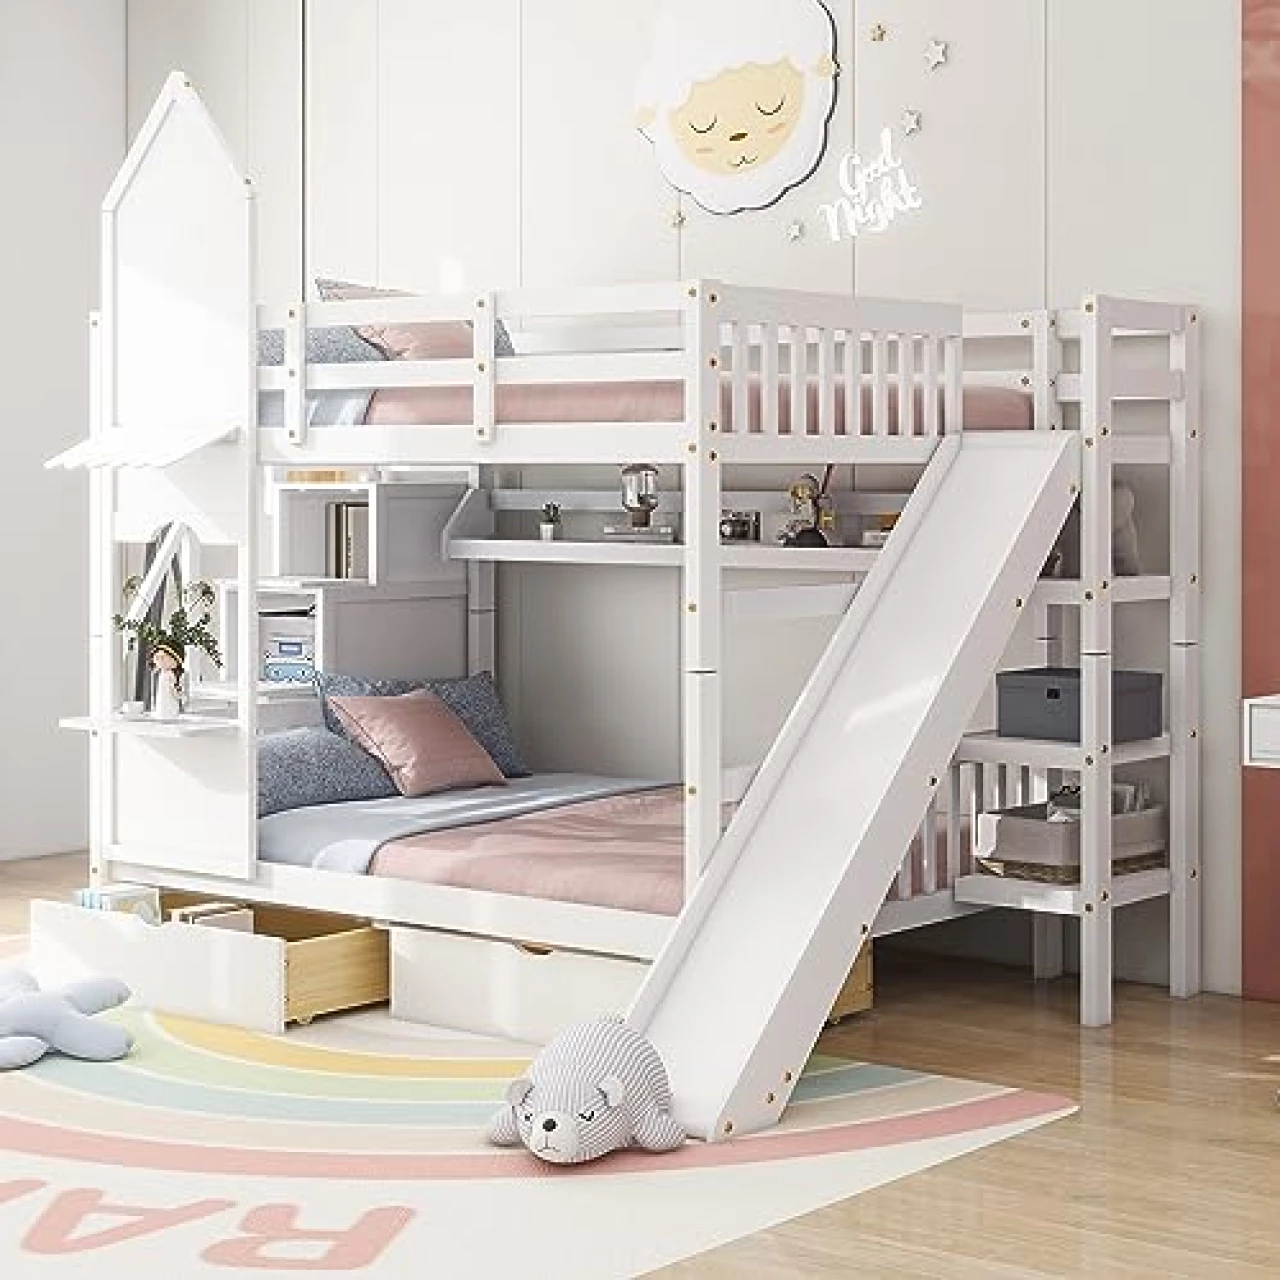 ERYE Full Over Full Size Castle Style Bunk Bed with 2 Drawers, Shelves and Slide